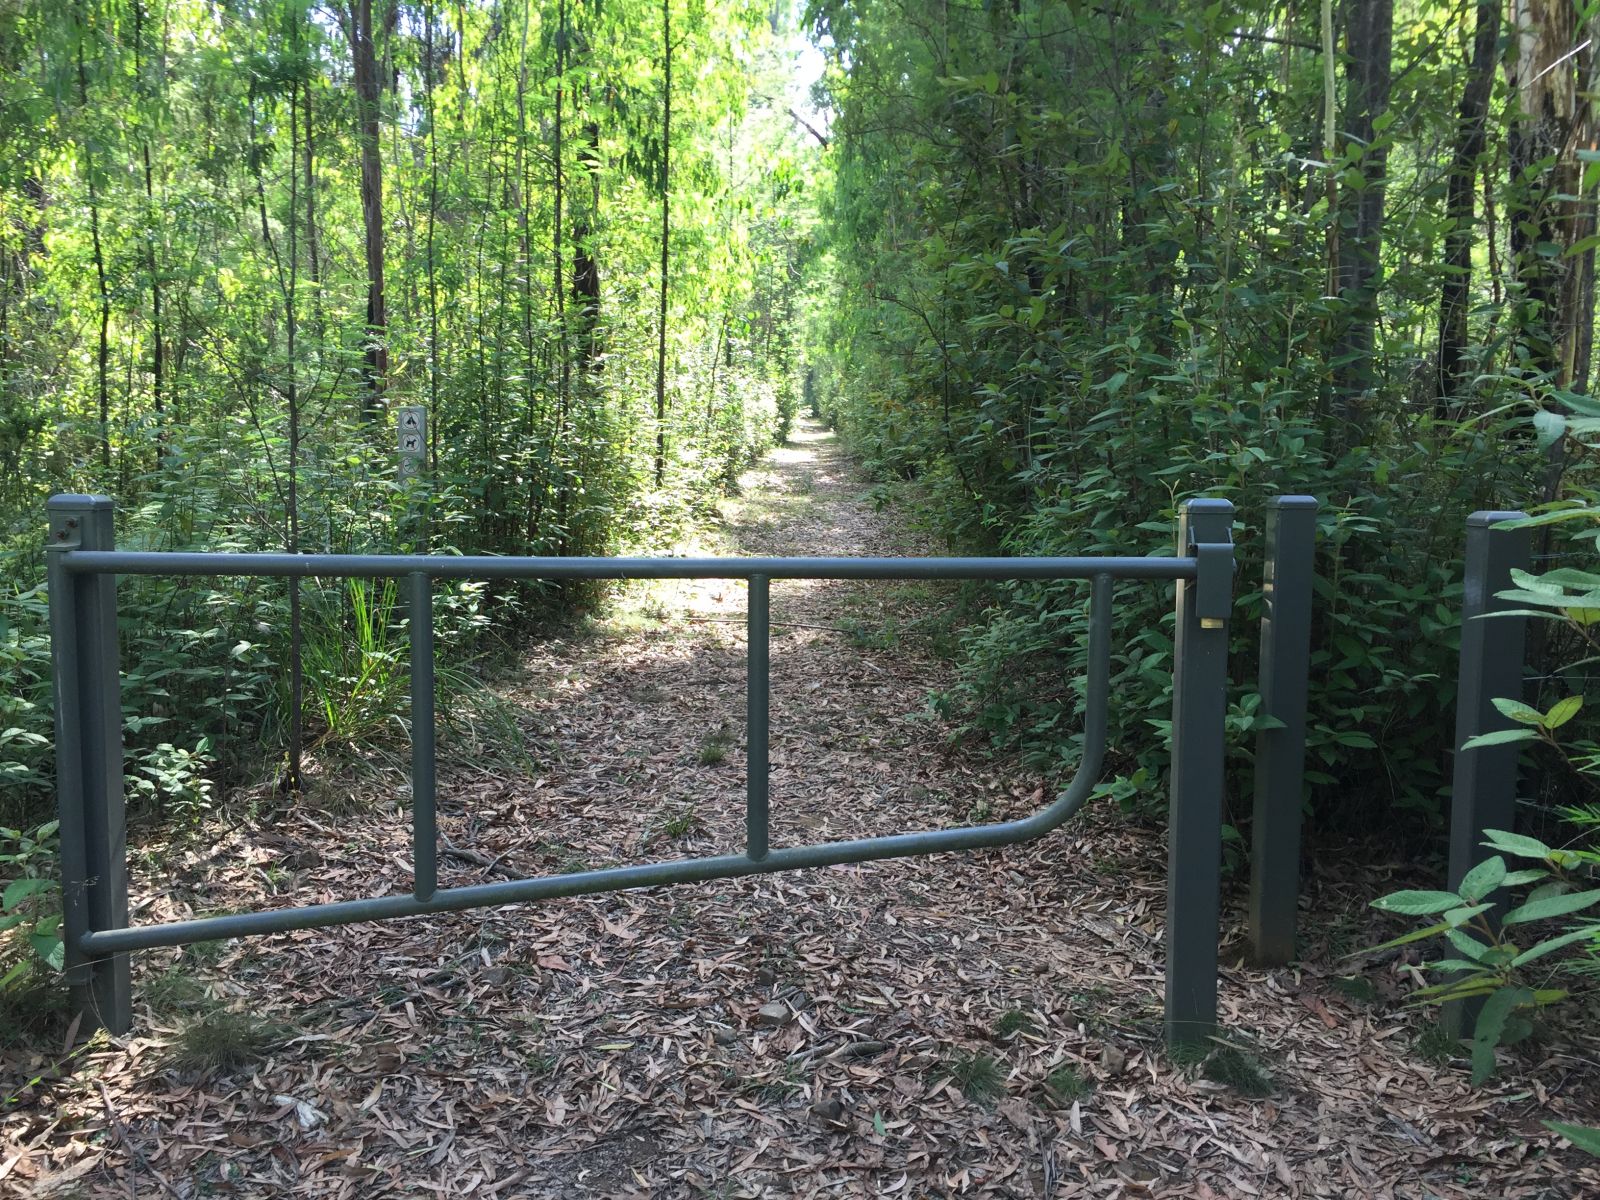 A gate across a dirt path lined with green trees